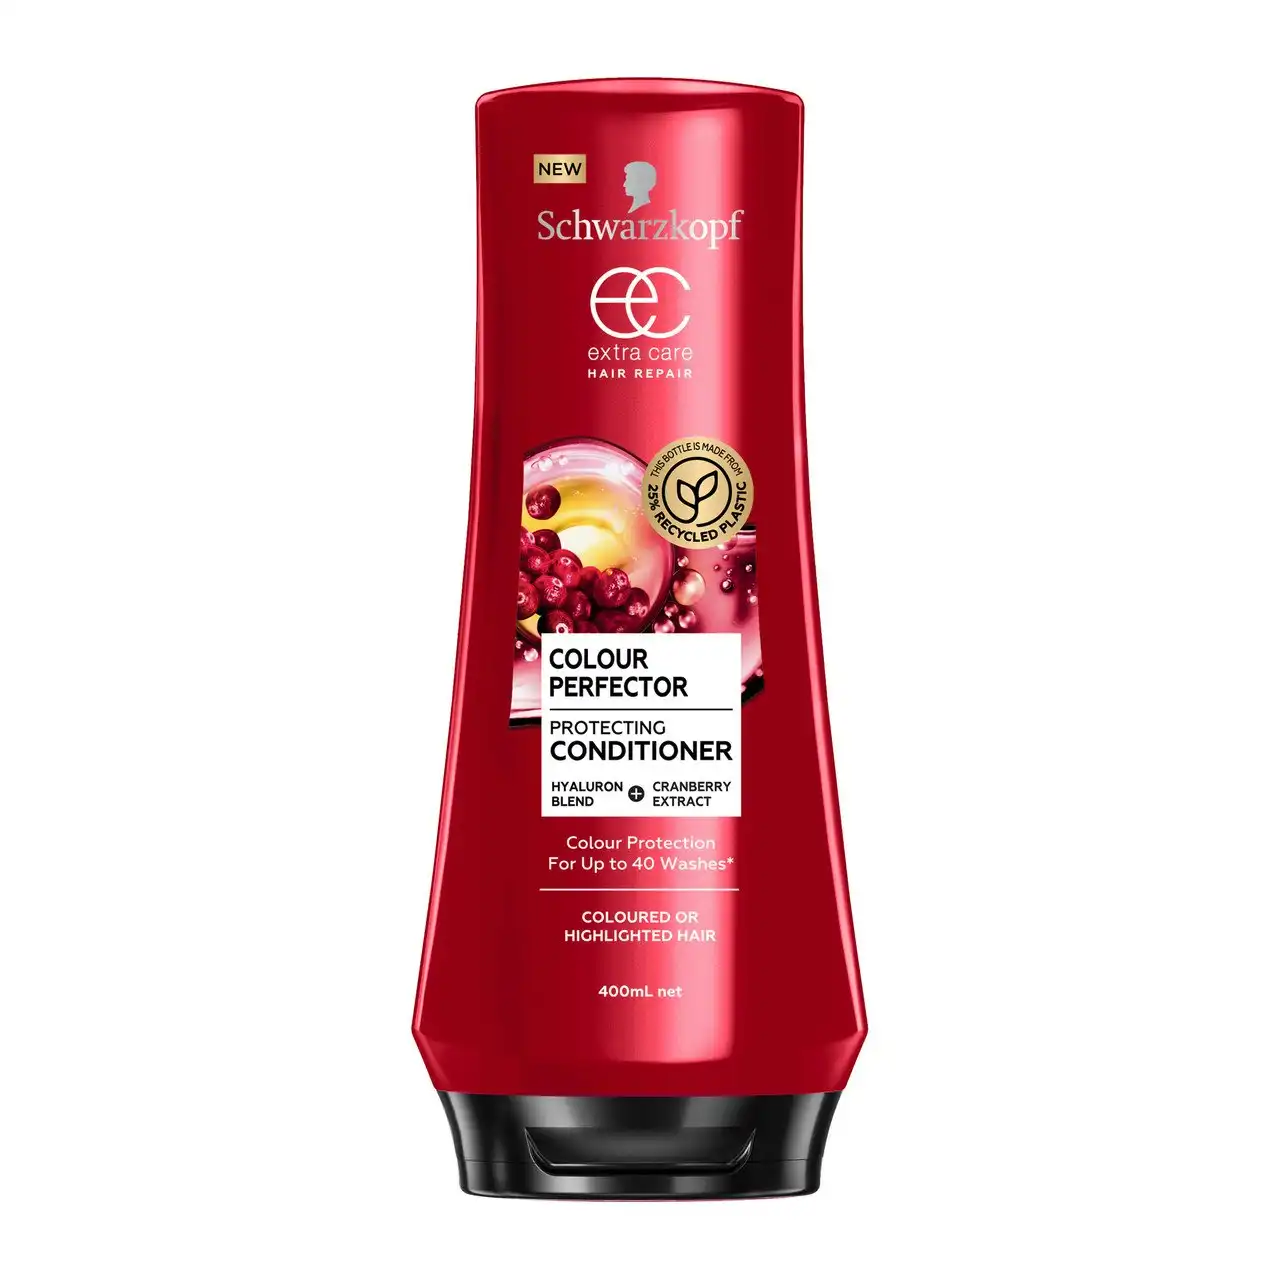 Schwarzkopf Extra Care Colour Perfector Protecting Conditioner 400mL